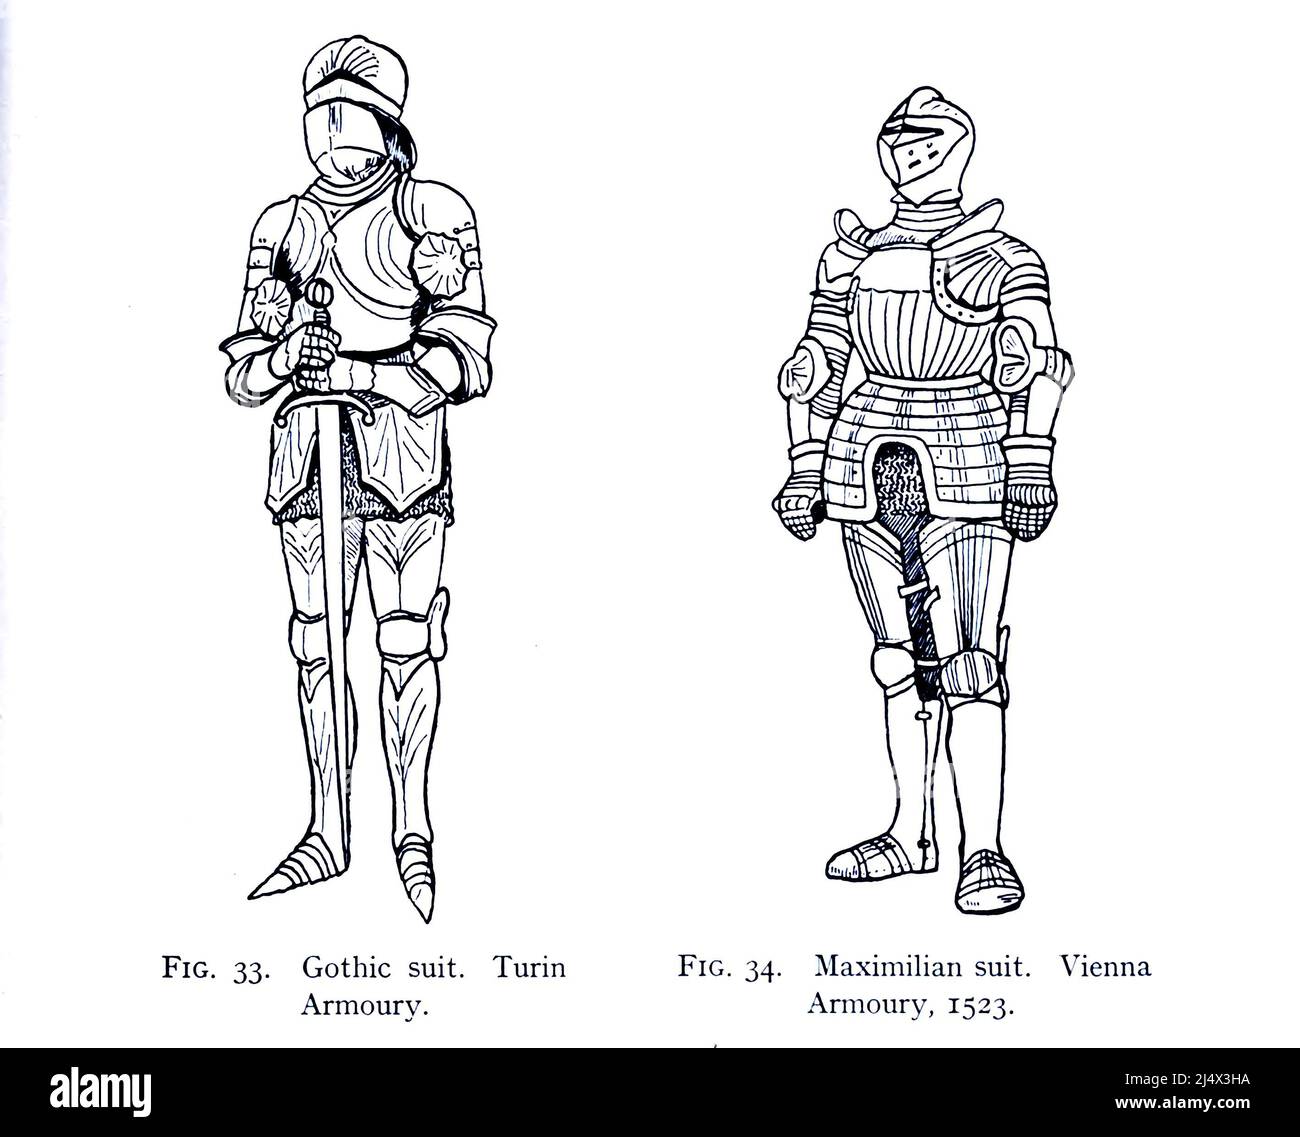 Gothic suit. Turin Armoury. (Left) Maximilian suit. Vienna Armoury, 1523 (Right) from the book ' Armour & weapons ' by Charles John Ffoulkes,  Publisher Oxford Clarendon press 1909 Stock Photo